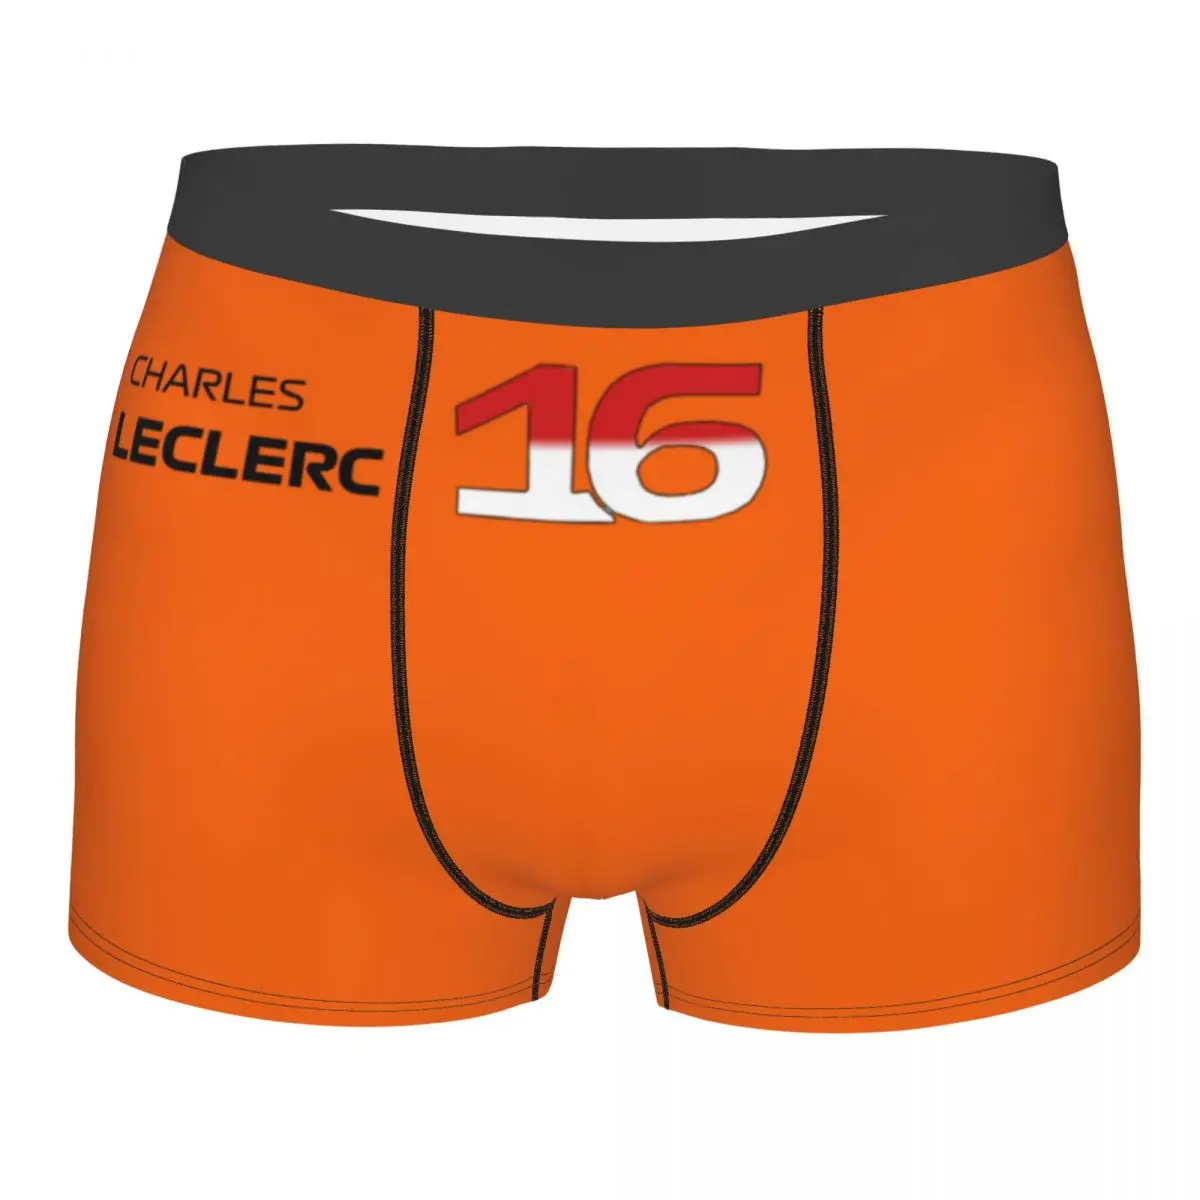 Charles Leclerc F1 Man's Boxer Briefs Underwear Highly Breathable Top Quality Birthday Gifts